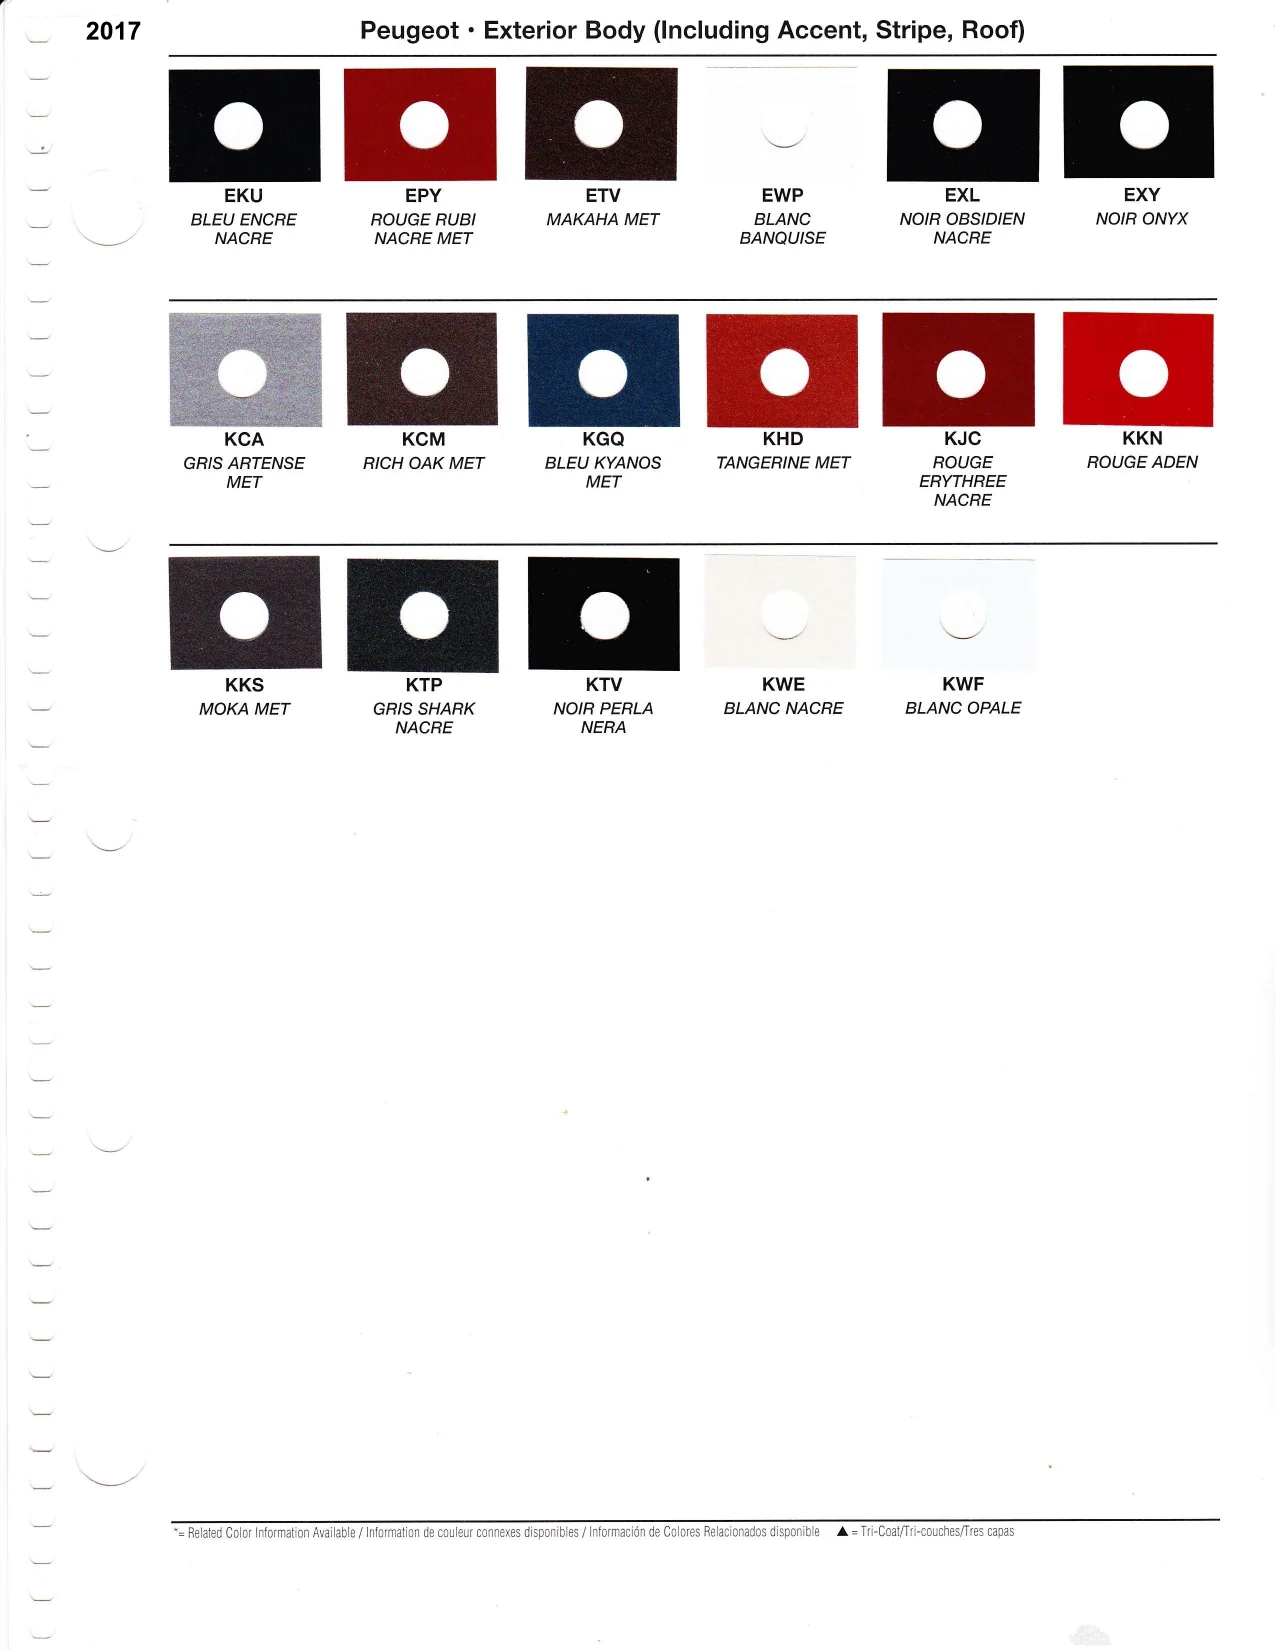 paint swatch examples for all 2017 Peugeot vehicles